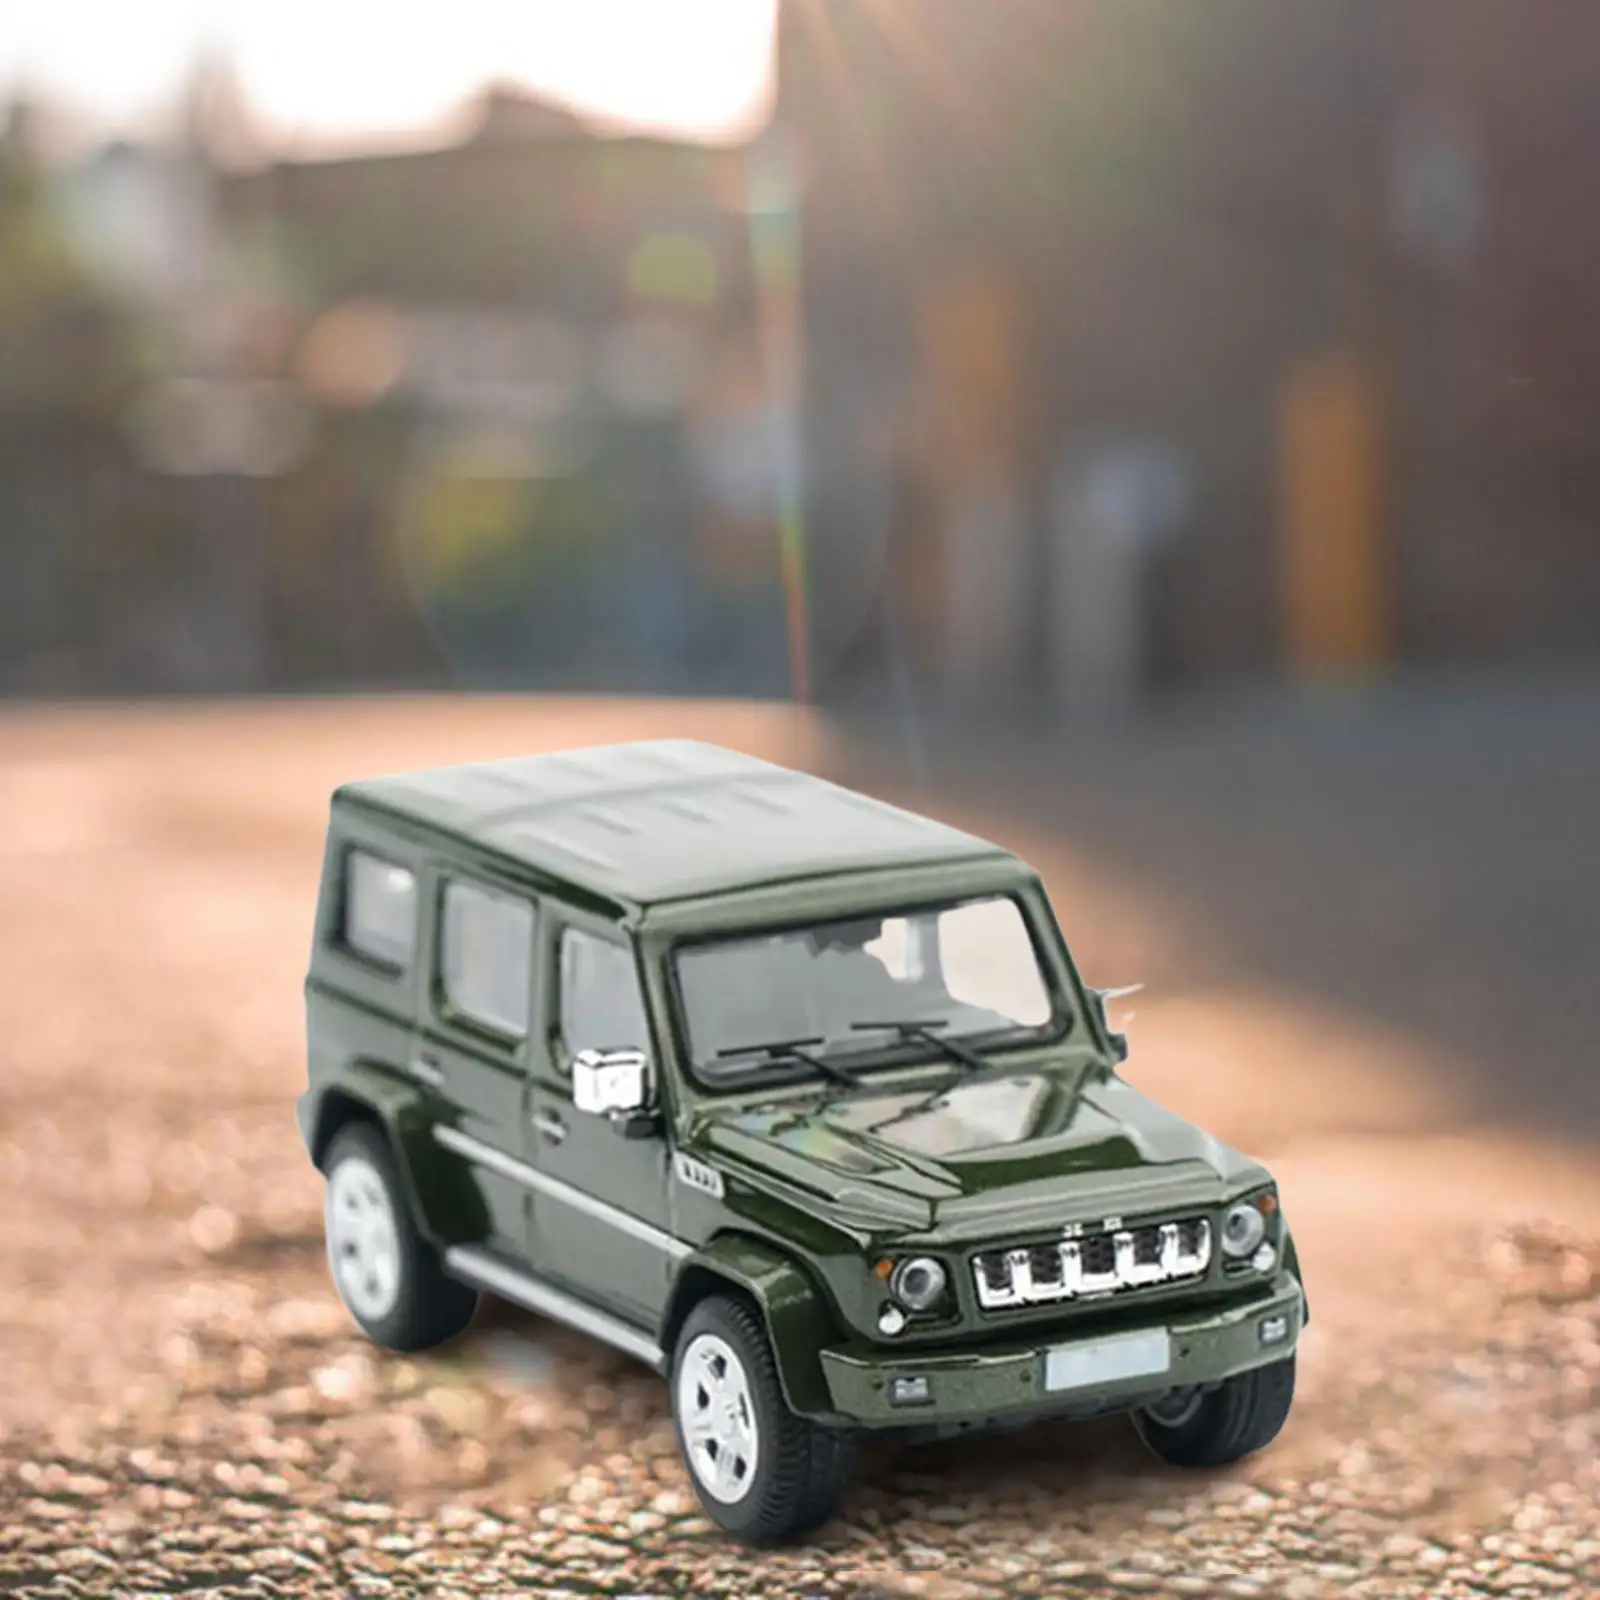 1/64 Miniature Diecast Toys Simulation Mini Vehicles Toys for Diorama Micro Landscapes Photography Props Accessories